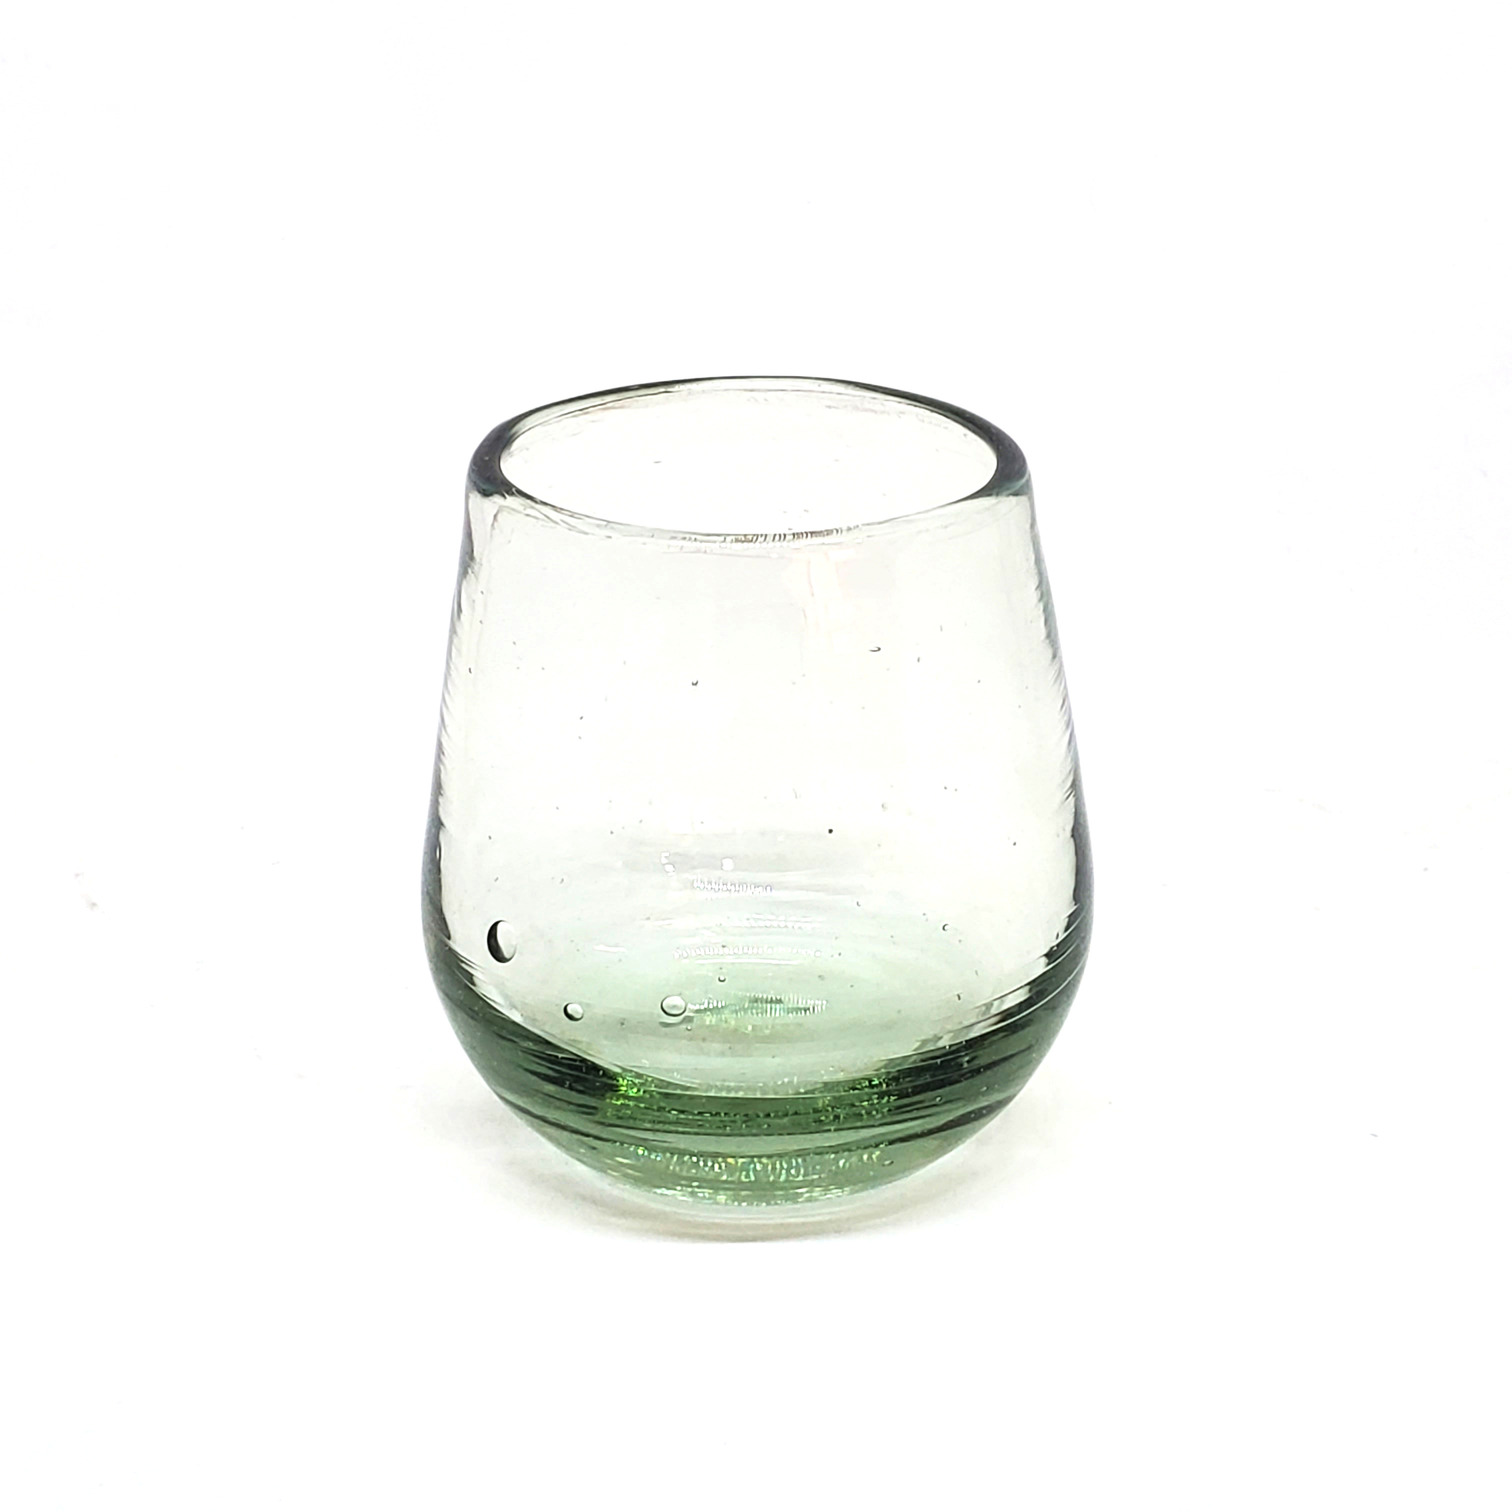 MEXICAN GLASSWARE / Clear Roly Poly Glasses (set of 6) / Our Clear Blown Glasses are individually handcrafted from recycled glass, making each of them unique works of art.